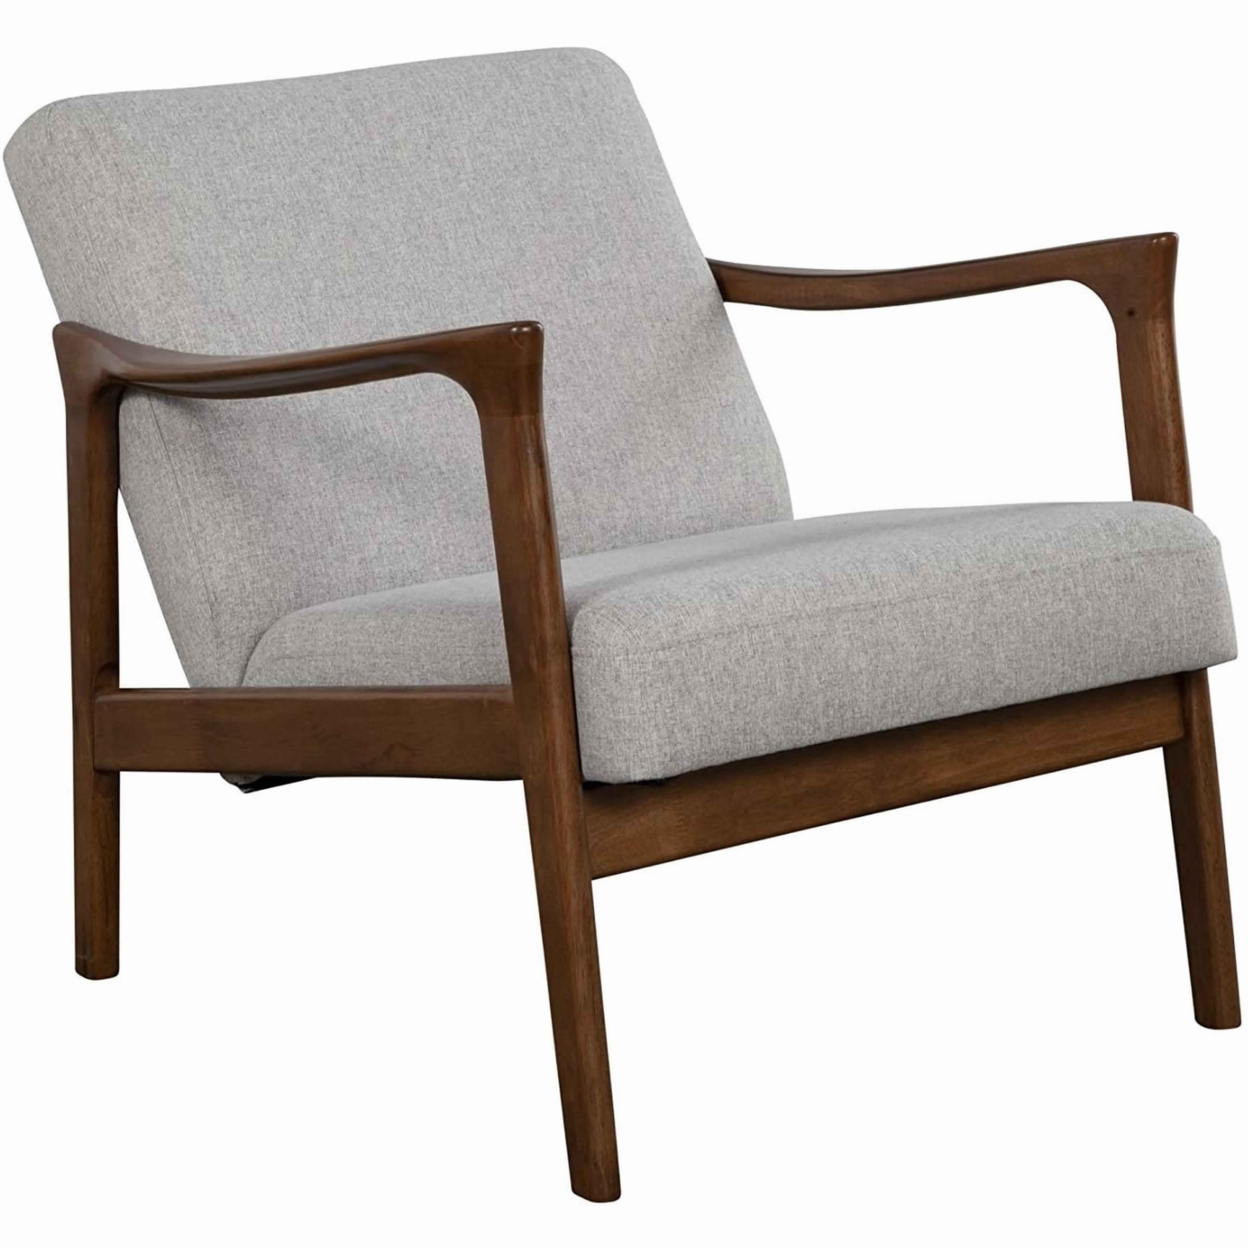 Fabric Upholstered Mid Century Wooden Lounge Chair, Gray And Brown- Saltoro Sherpi